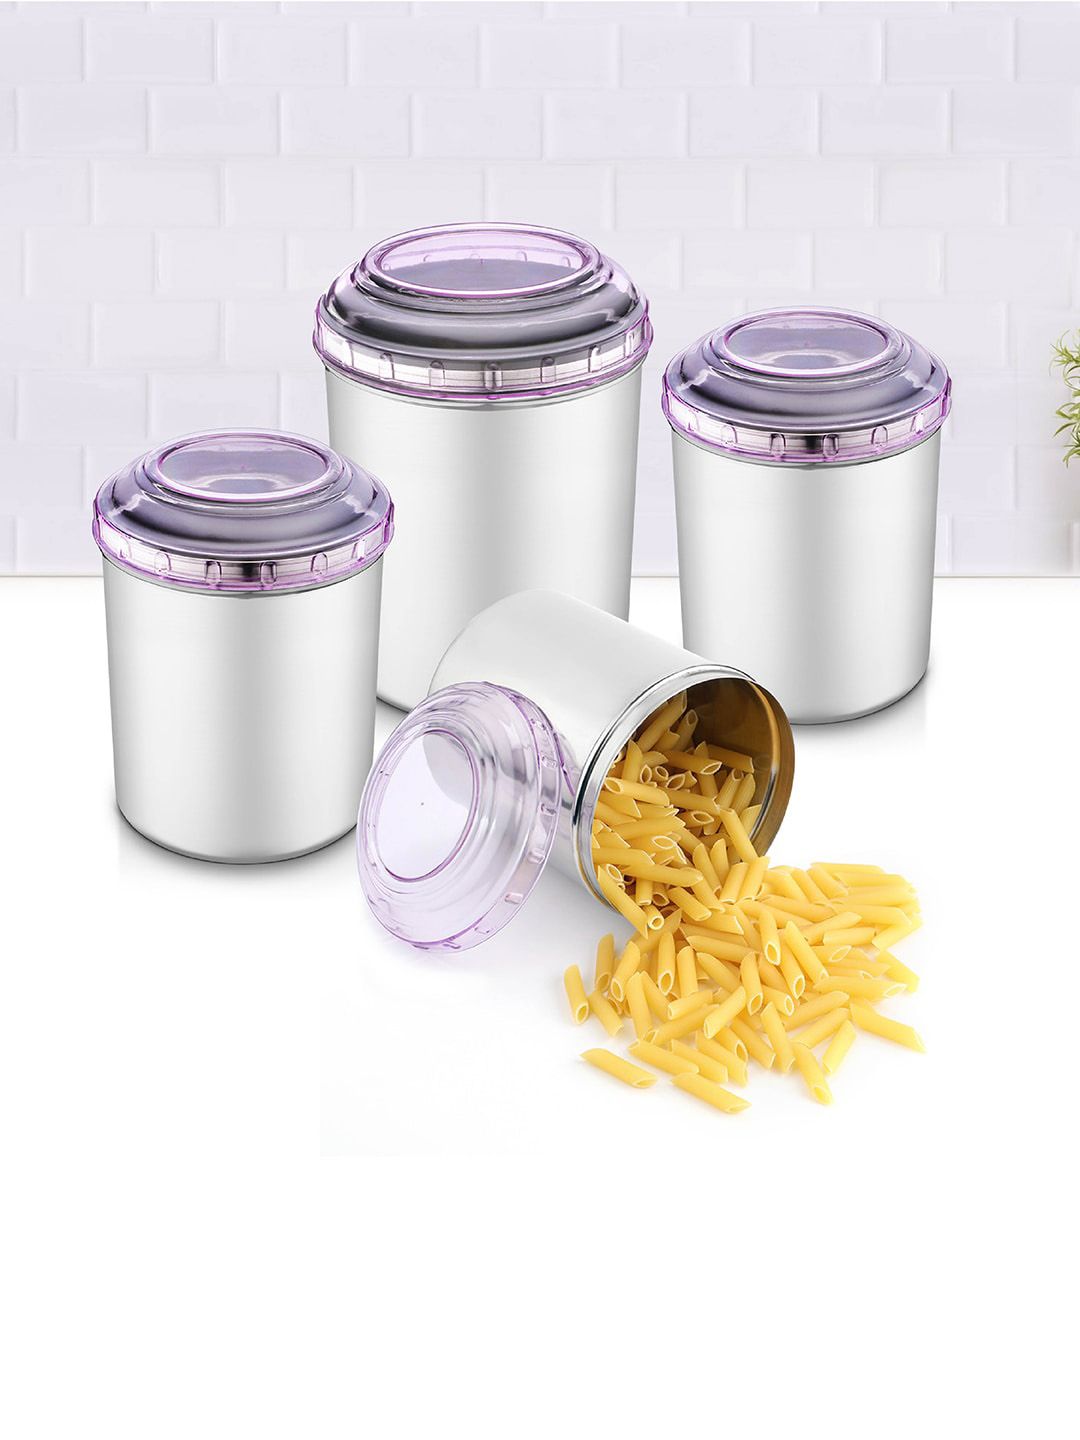 Jensons Set Of 8 Silver-Toned Solid Stainless Steel Canisters Price in India